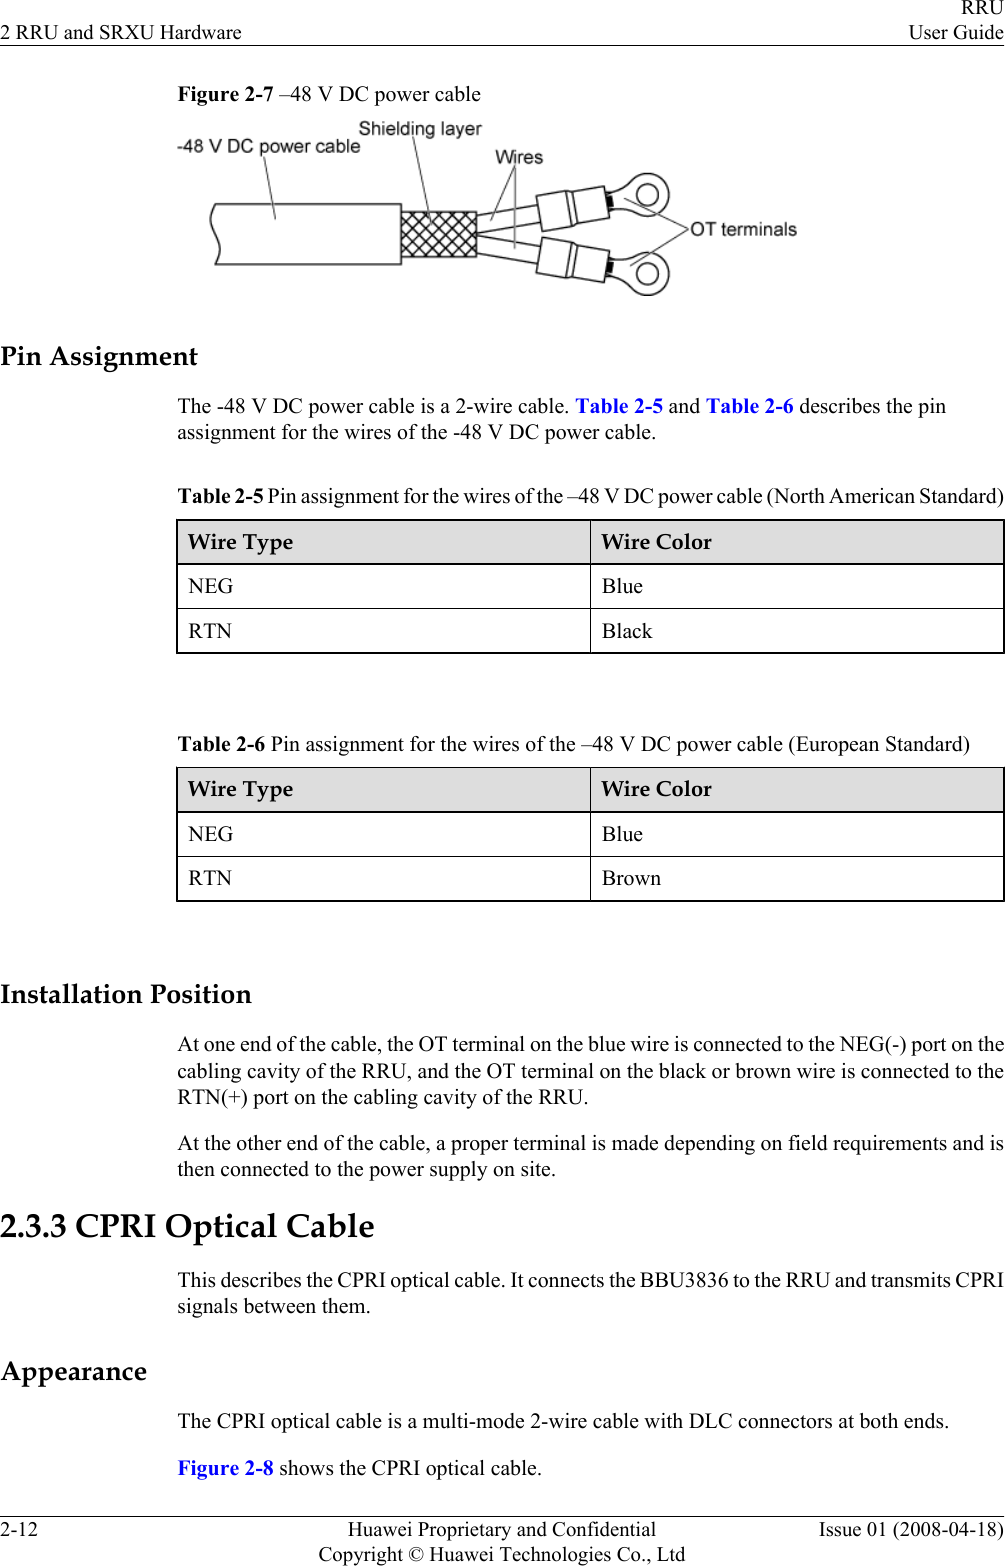 Figure 2-7 –48 V DC power cablePin AssignmentThe -48 V DC power cable is a 2-wire cable. Table 2-5 and Table 2-6 describes the pinassignment for the wires of the -48 V DC power cable.Table 2-5 Pin assignment for the wires of the –48 V DC power cable (North American Standard)Wire Type Wire ColorNEG BlueRTN Black Table 2-6 Pin assignment for the wires of the –48 V DC power cable (European Standard)Wire Type Wire ColorNEG BlueRTN Brown Installation PositionAt one end of the cable, the OT terminal on the blue wire is connected to the NEG(-) port on thecabling cavity of the RRU, and the OT terminal on the black or brown wire is connected to theRTN(+) port on the cabling cavity of the RRU.At the other end of the cable, a proper terminal is made depending on field requirements and isthen connected to the power supply on site.2.3.3 CPRI Optical CableThis describes the CPRI optical cable. It connects the BBU3836 to the RRU and transmits CPRIsignals between them.AppearanceThe CPRI optical cable is a multi-mode 2-wire cable with DLC connectors at both ends.Figure 2-8 shows the CPRI optical cable.2 RRU and SRXU HardwareRRUUser Guide2-12 Huawei Proprietary and ConfidentialCopyright © Huawei Technologies Co., LtdIssue 01 (2008-04-18)